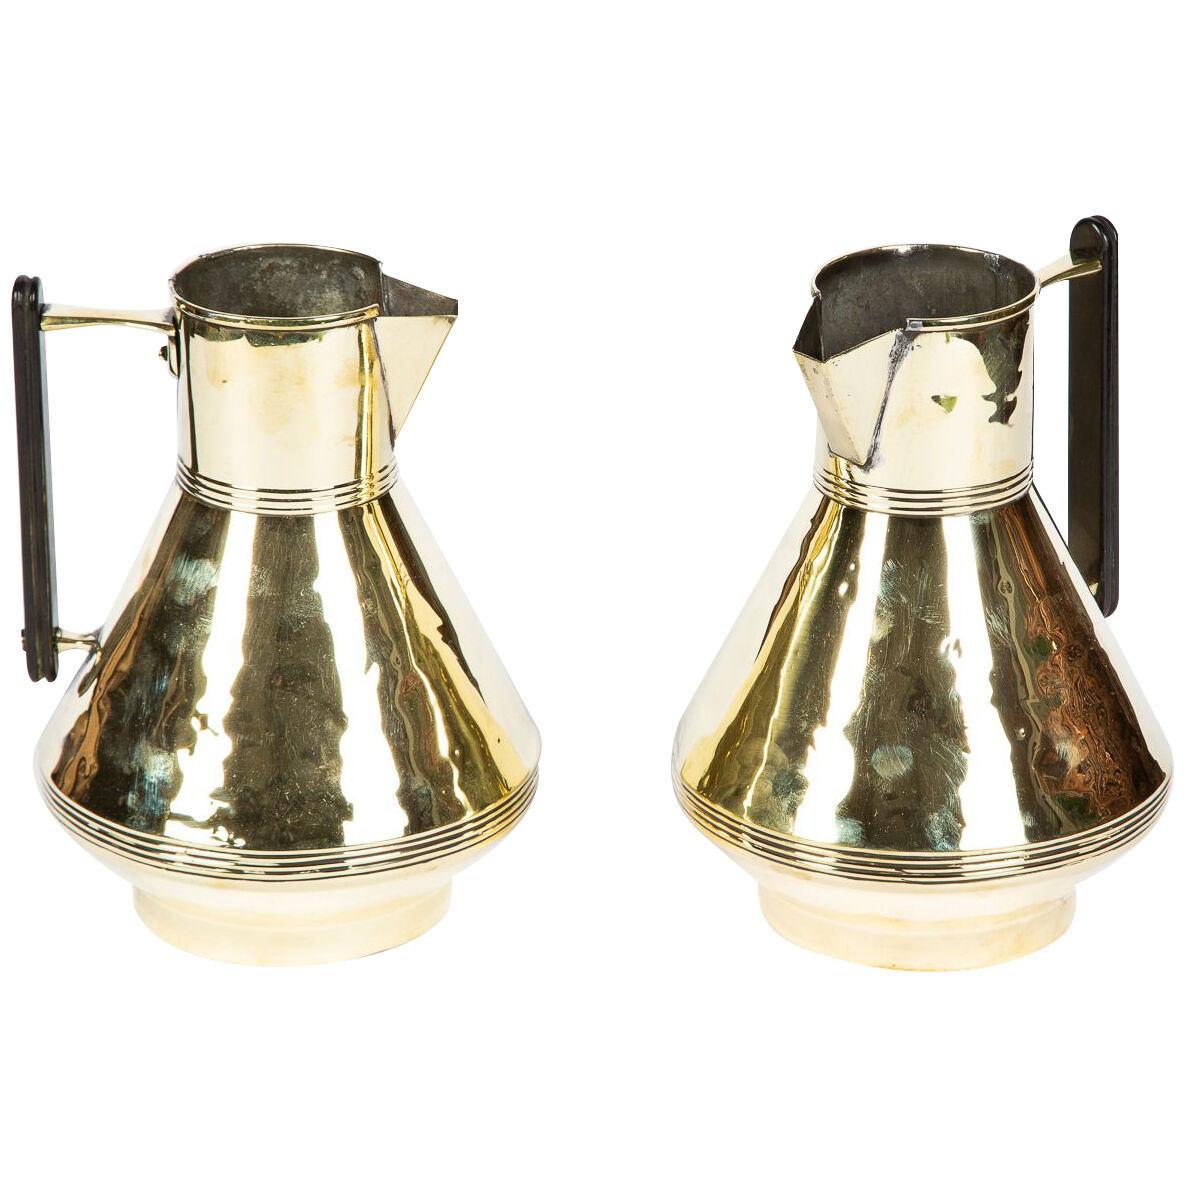 Pair of brass jugs by Fearncombe, designed by Christopher Dresser.